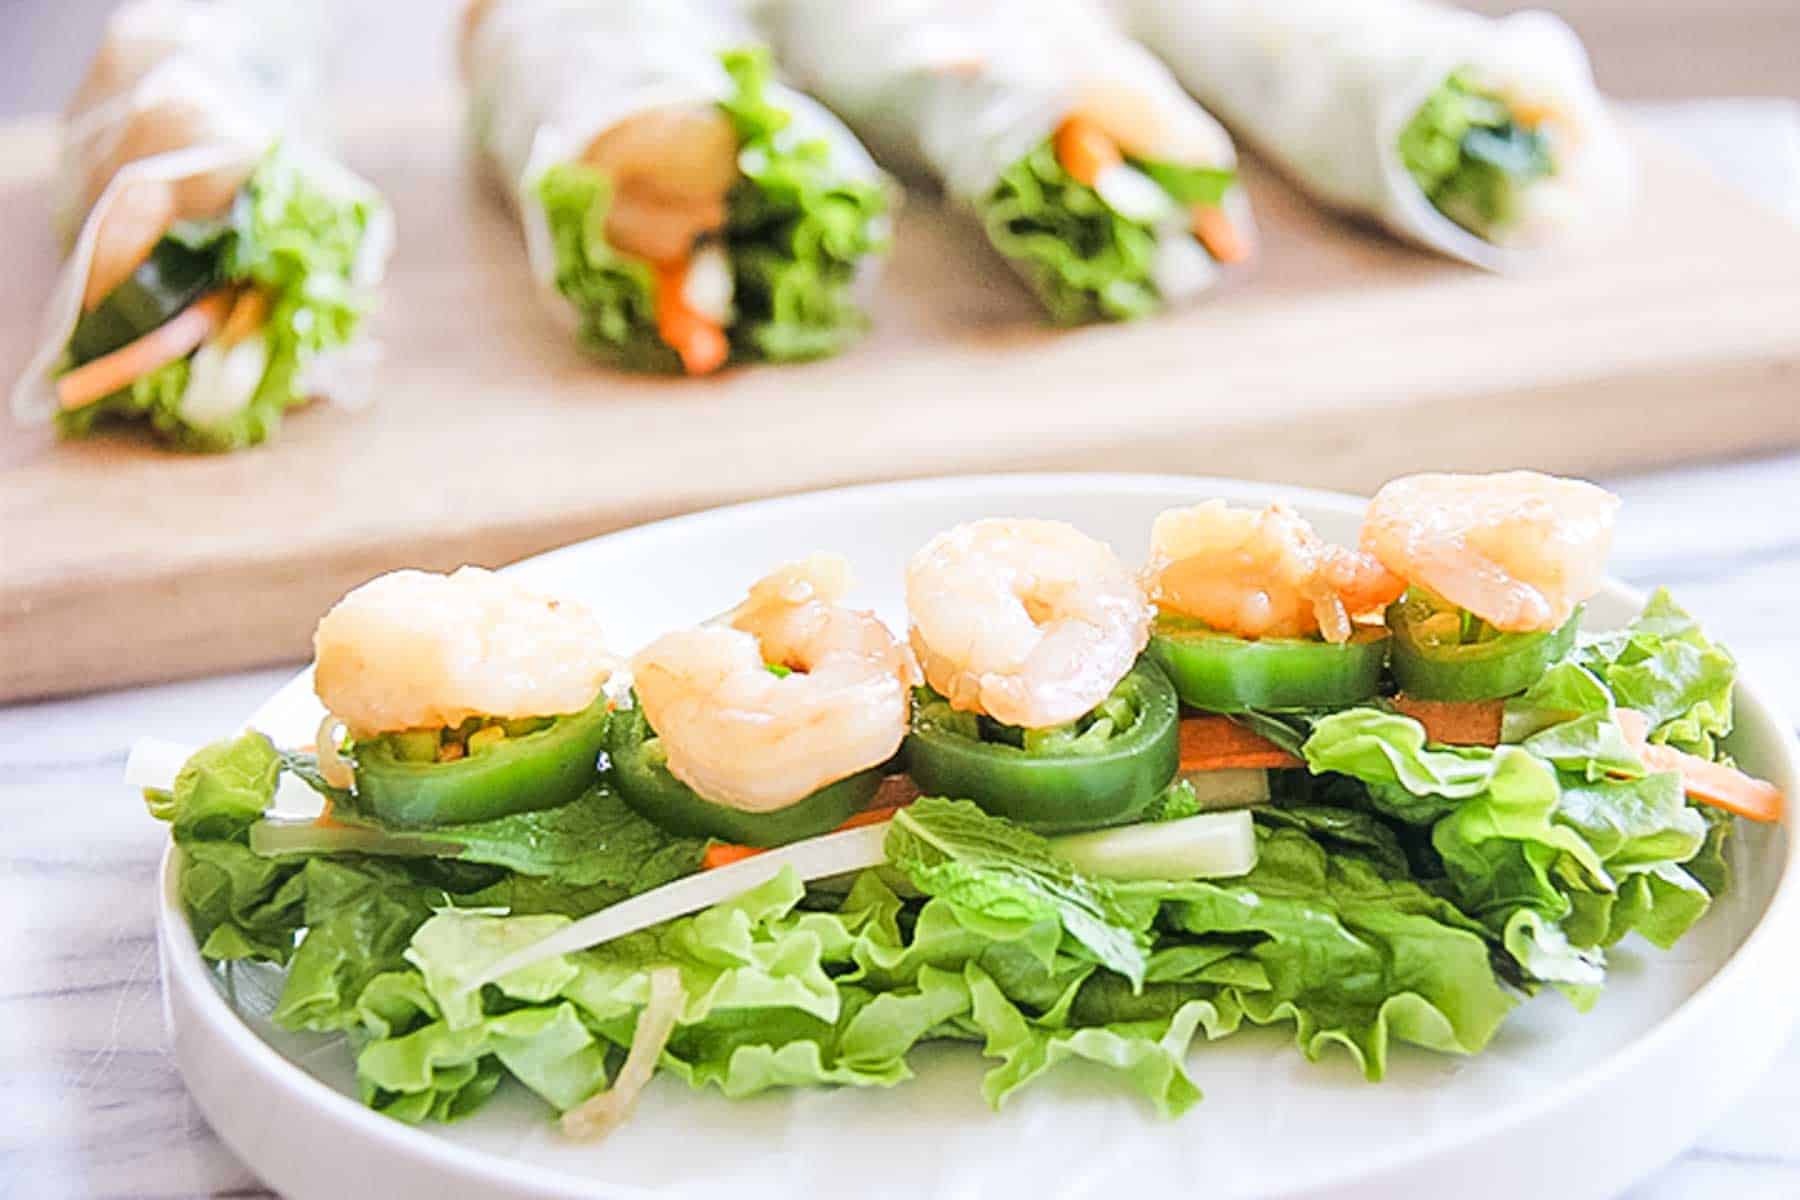 A bed of lettuce topped with julienned veggies, jalapeno slices and cooked shrimp on a white plate with fully made summer rolls on a cutting board in the background.